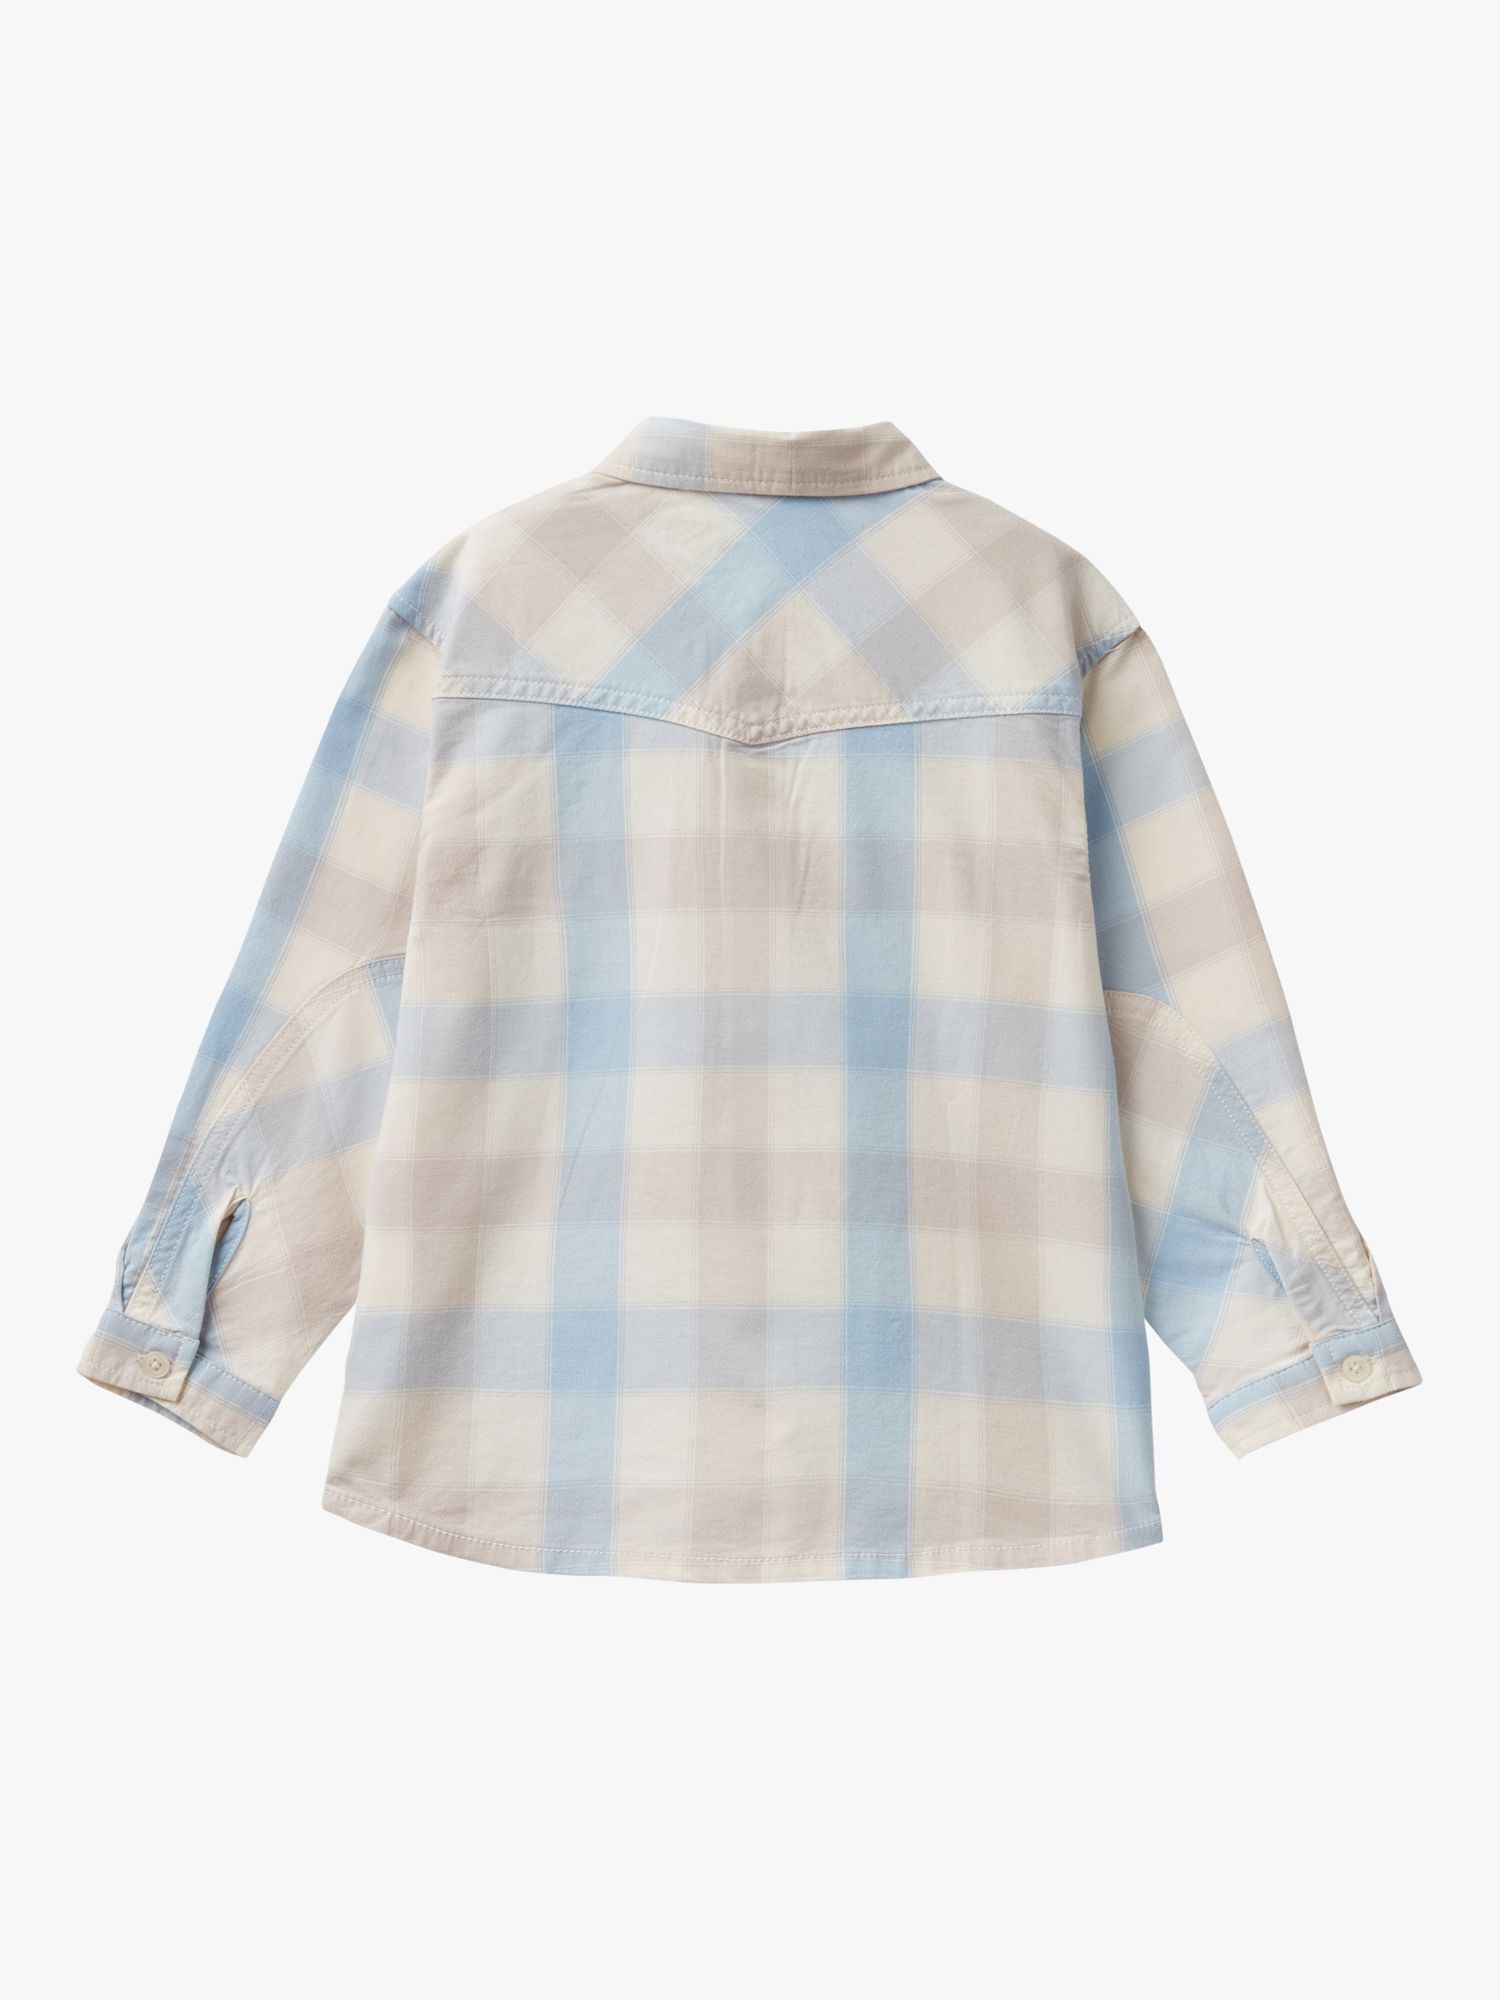 Benetton Kids' Checked Casual Long Sleeve Shirt, Blue/Multi, 2-3 years